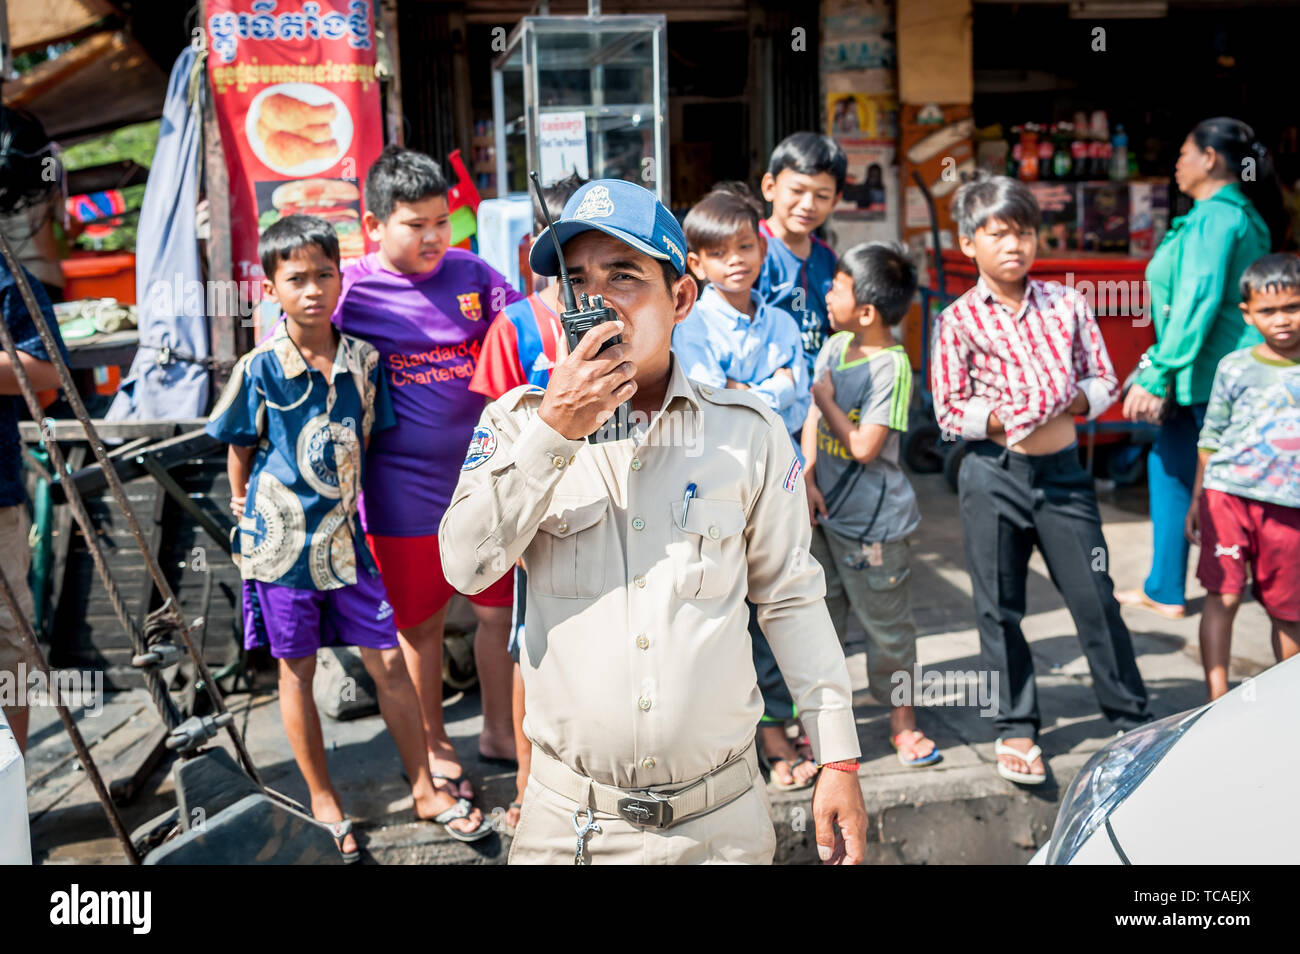 A Cambodian policeman surrounded by street kids attends to a situation in the Cambodian city of Phnom Penh. Stock Photo